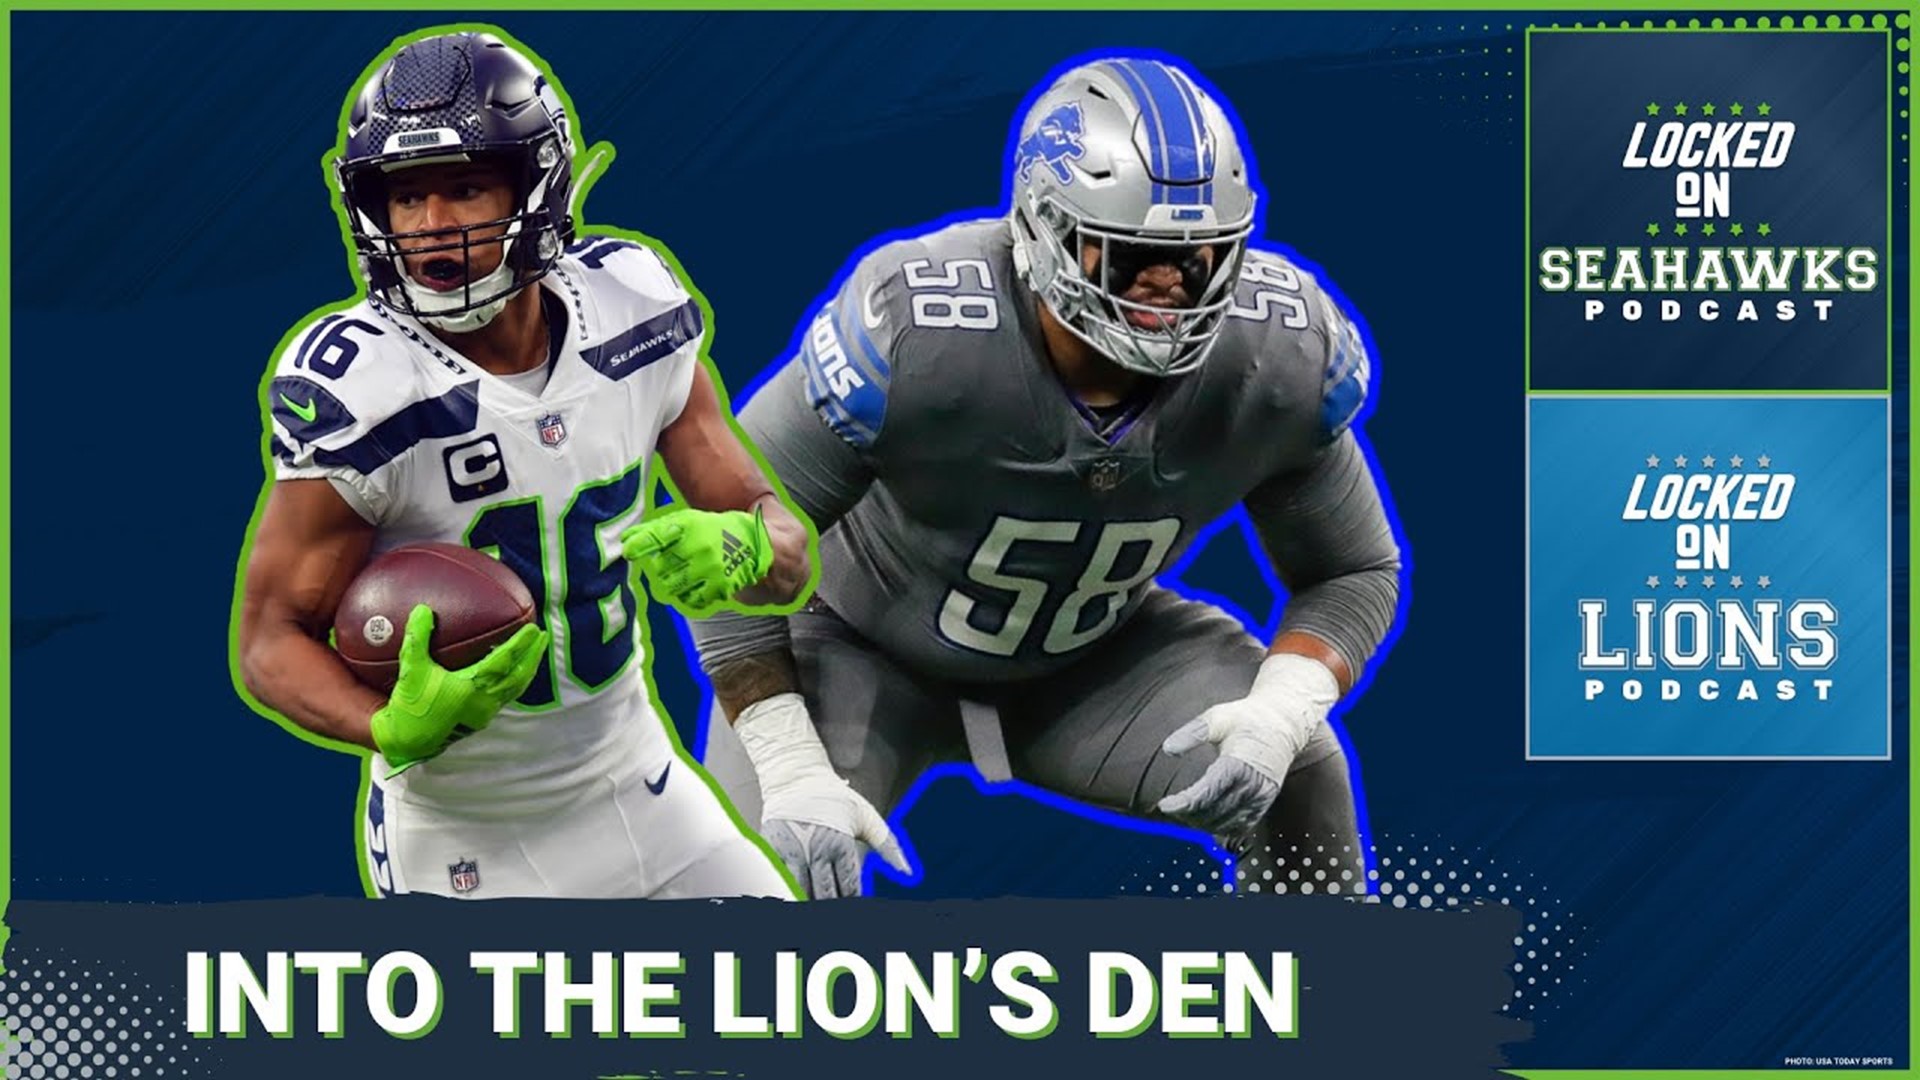 Coming off a rough performance in a season-opening loss to the Rams, the Seahawks will have to try to right the ship while likely missing key pieces of the O Line